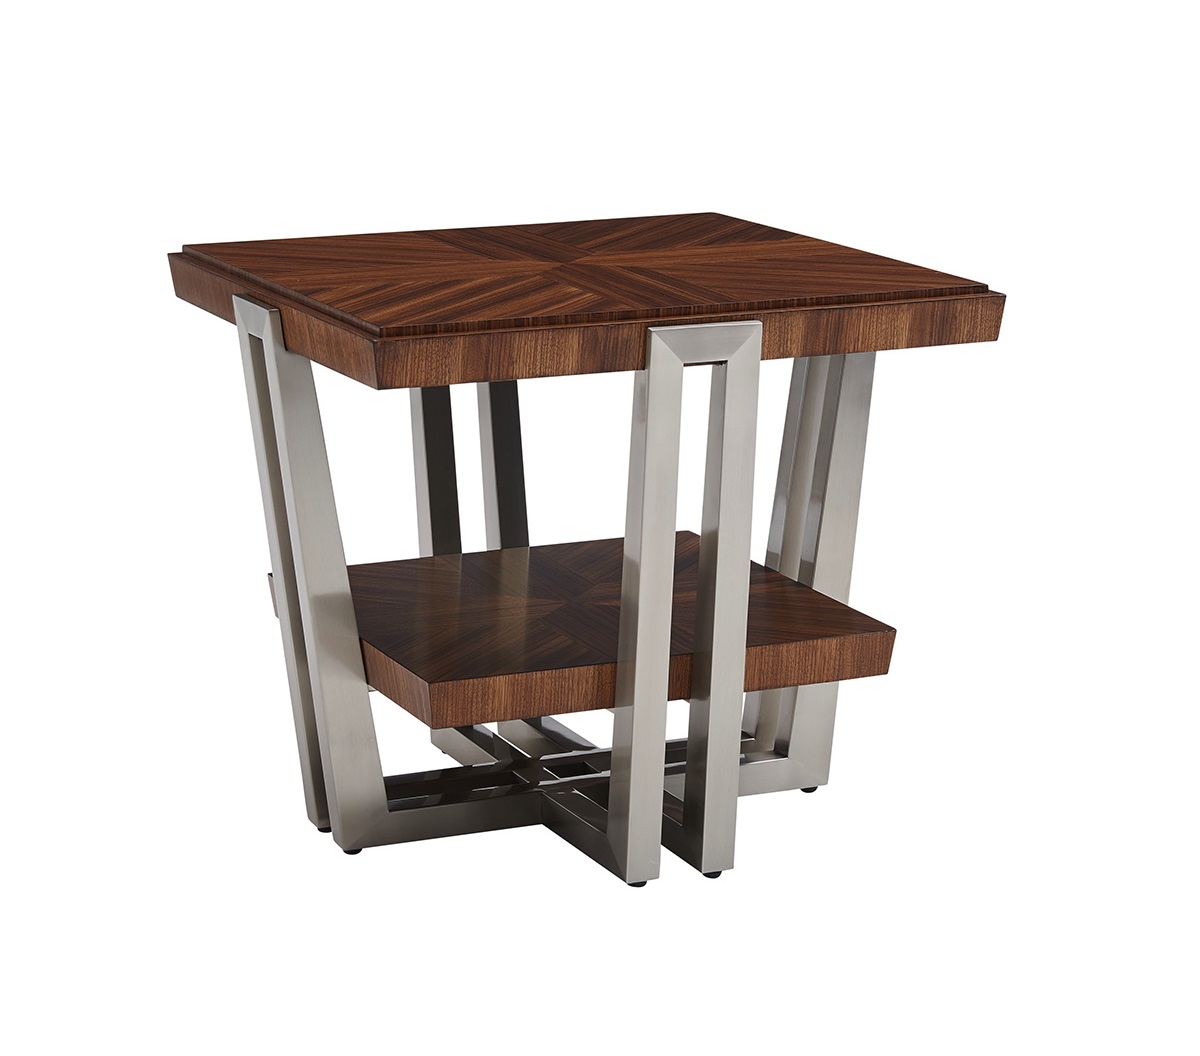 Kitano Gianni Square End Table, End Tables For Sale Cheap